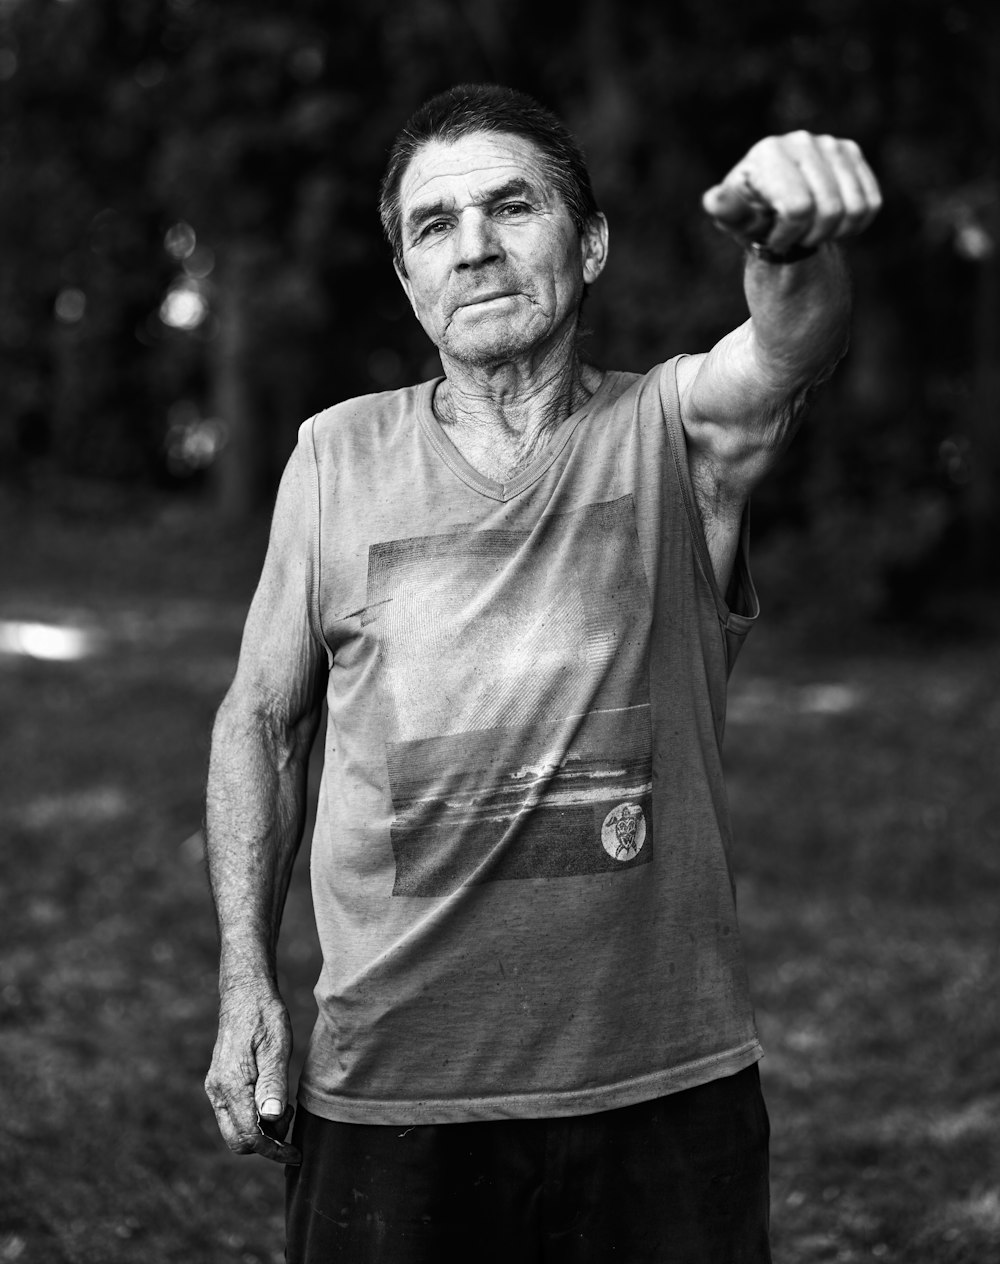 a black and white photo of a man holding a frisbee